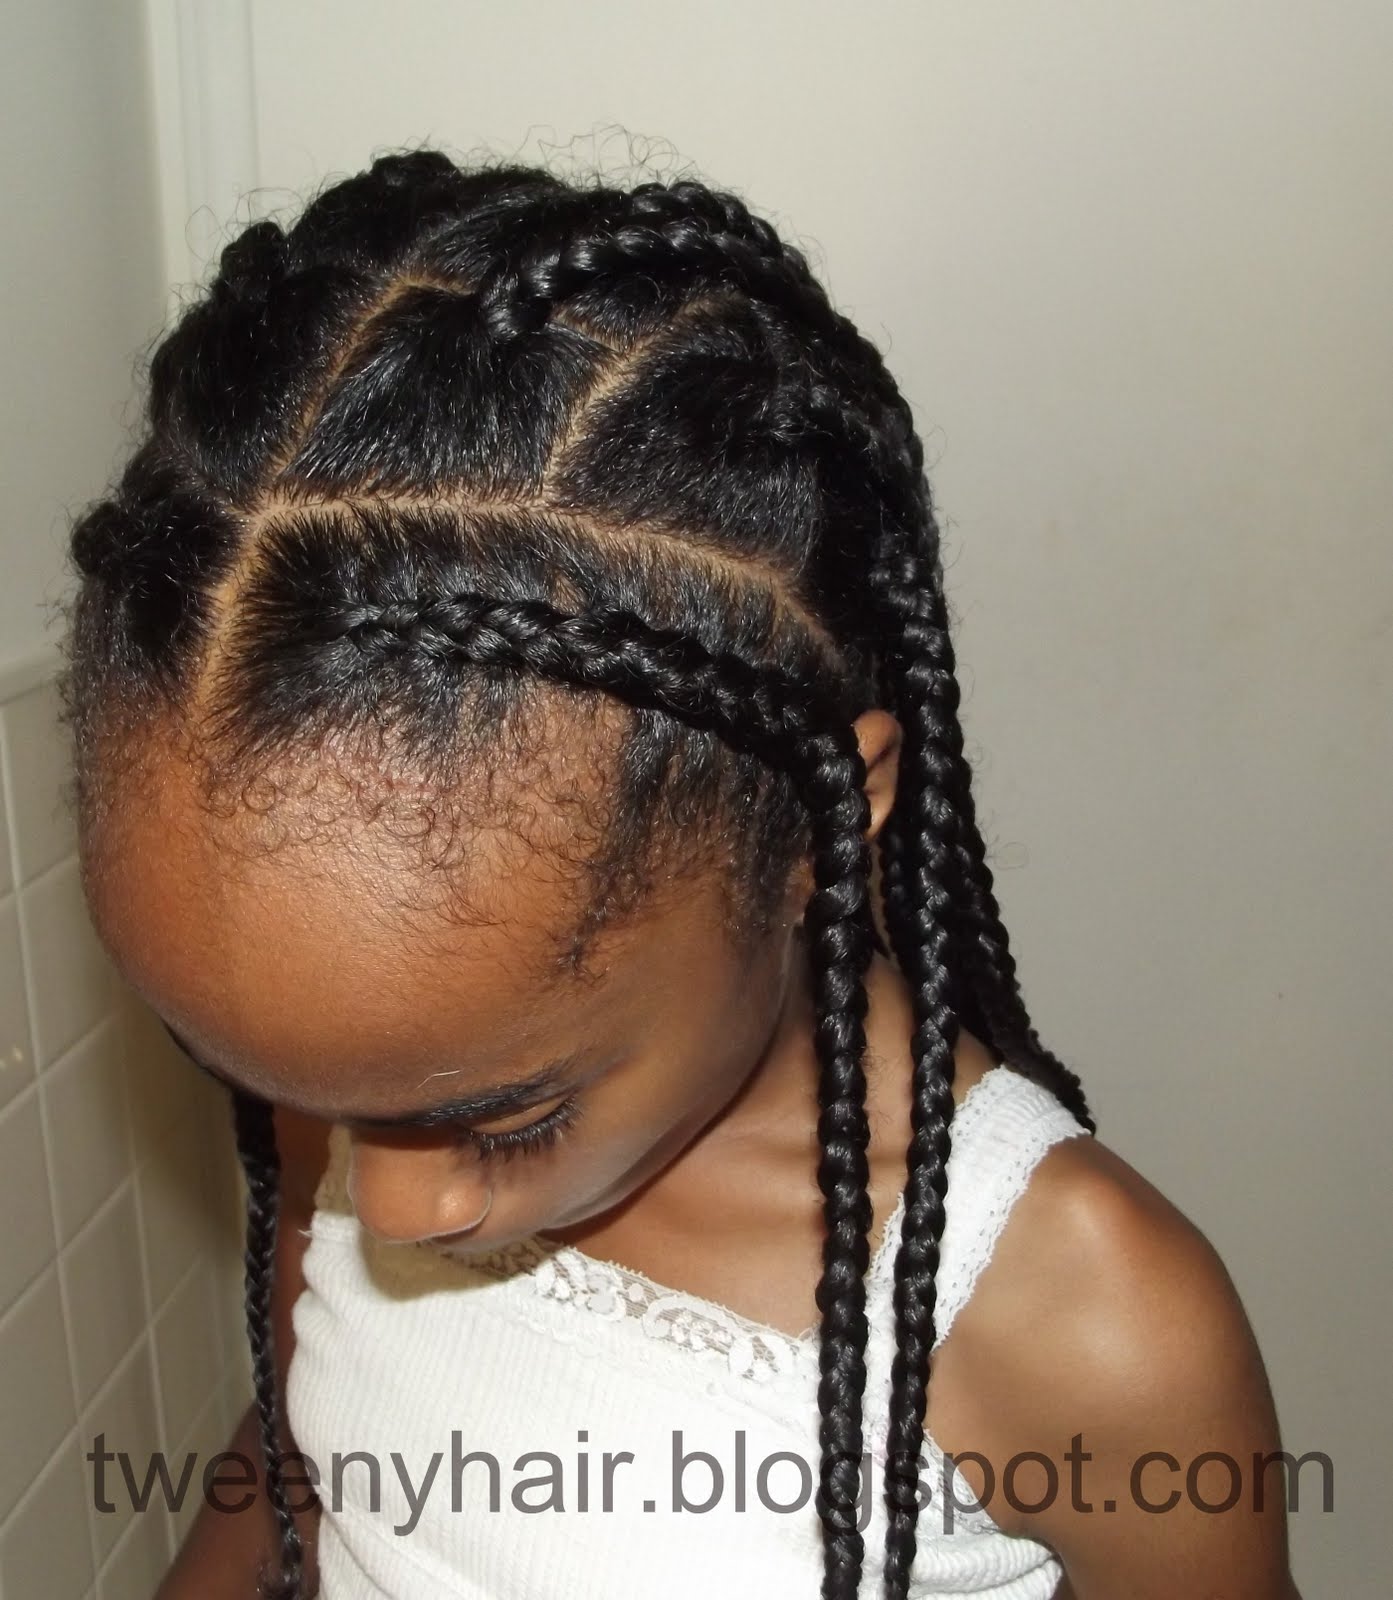 Braided Updos For Black Women With Natural Hair Simple Style - Cornrows and Box Braids